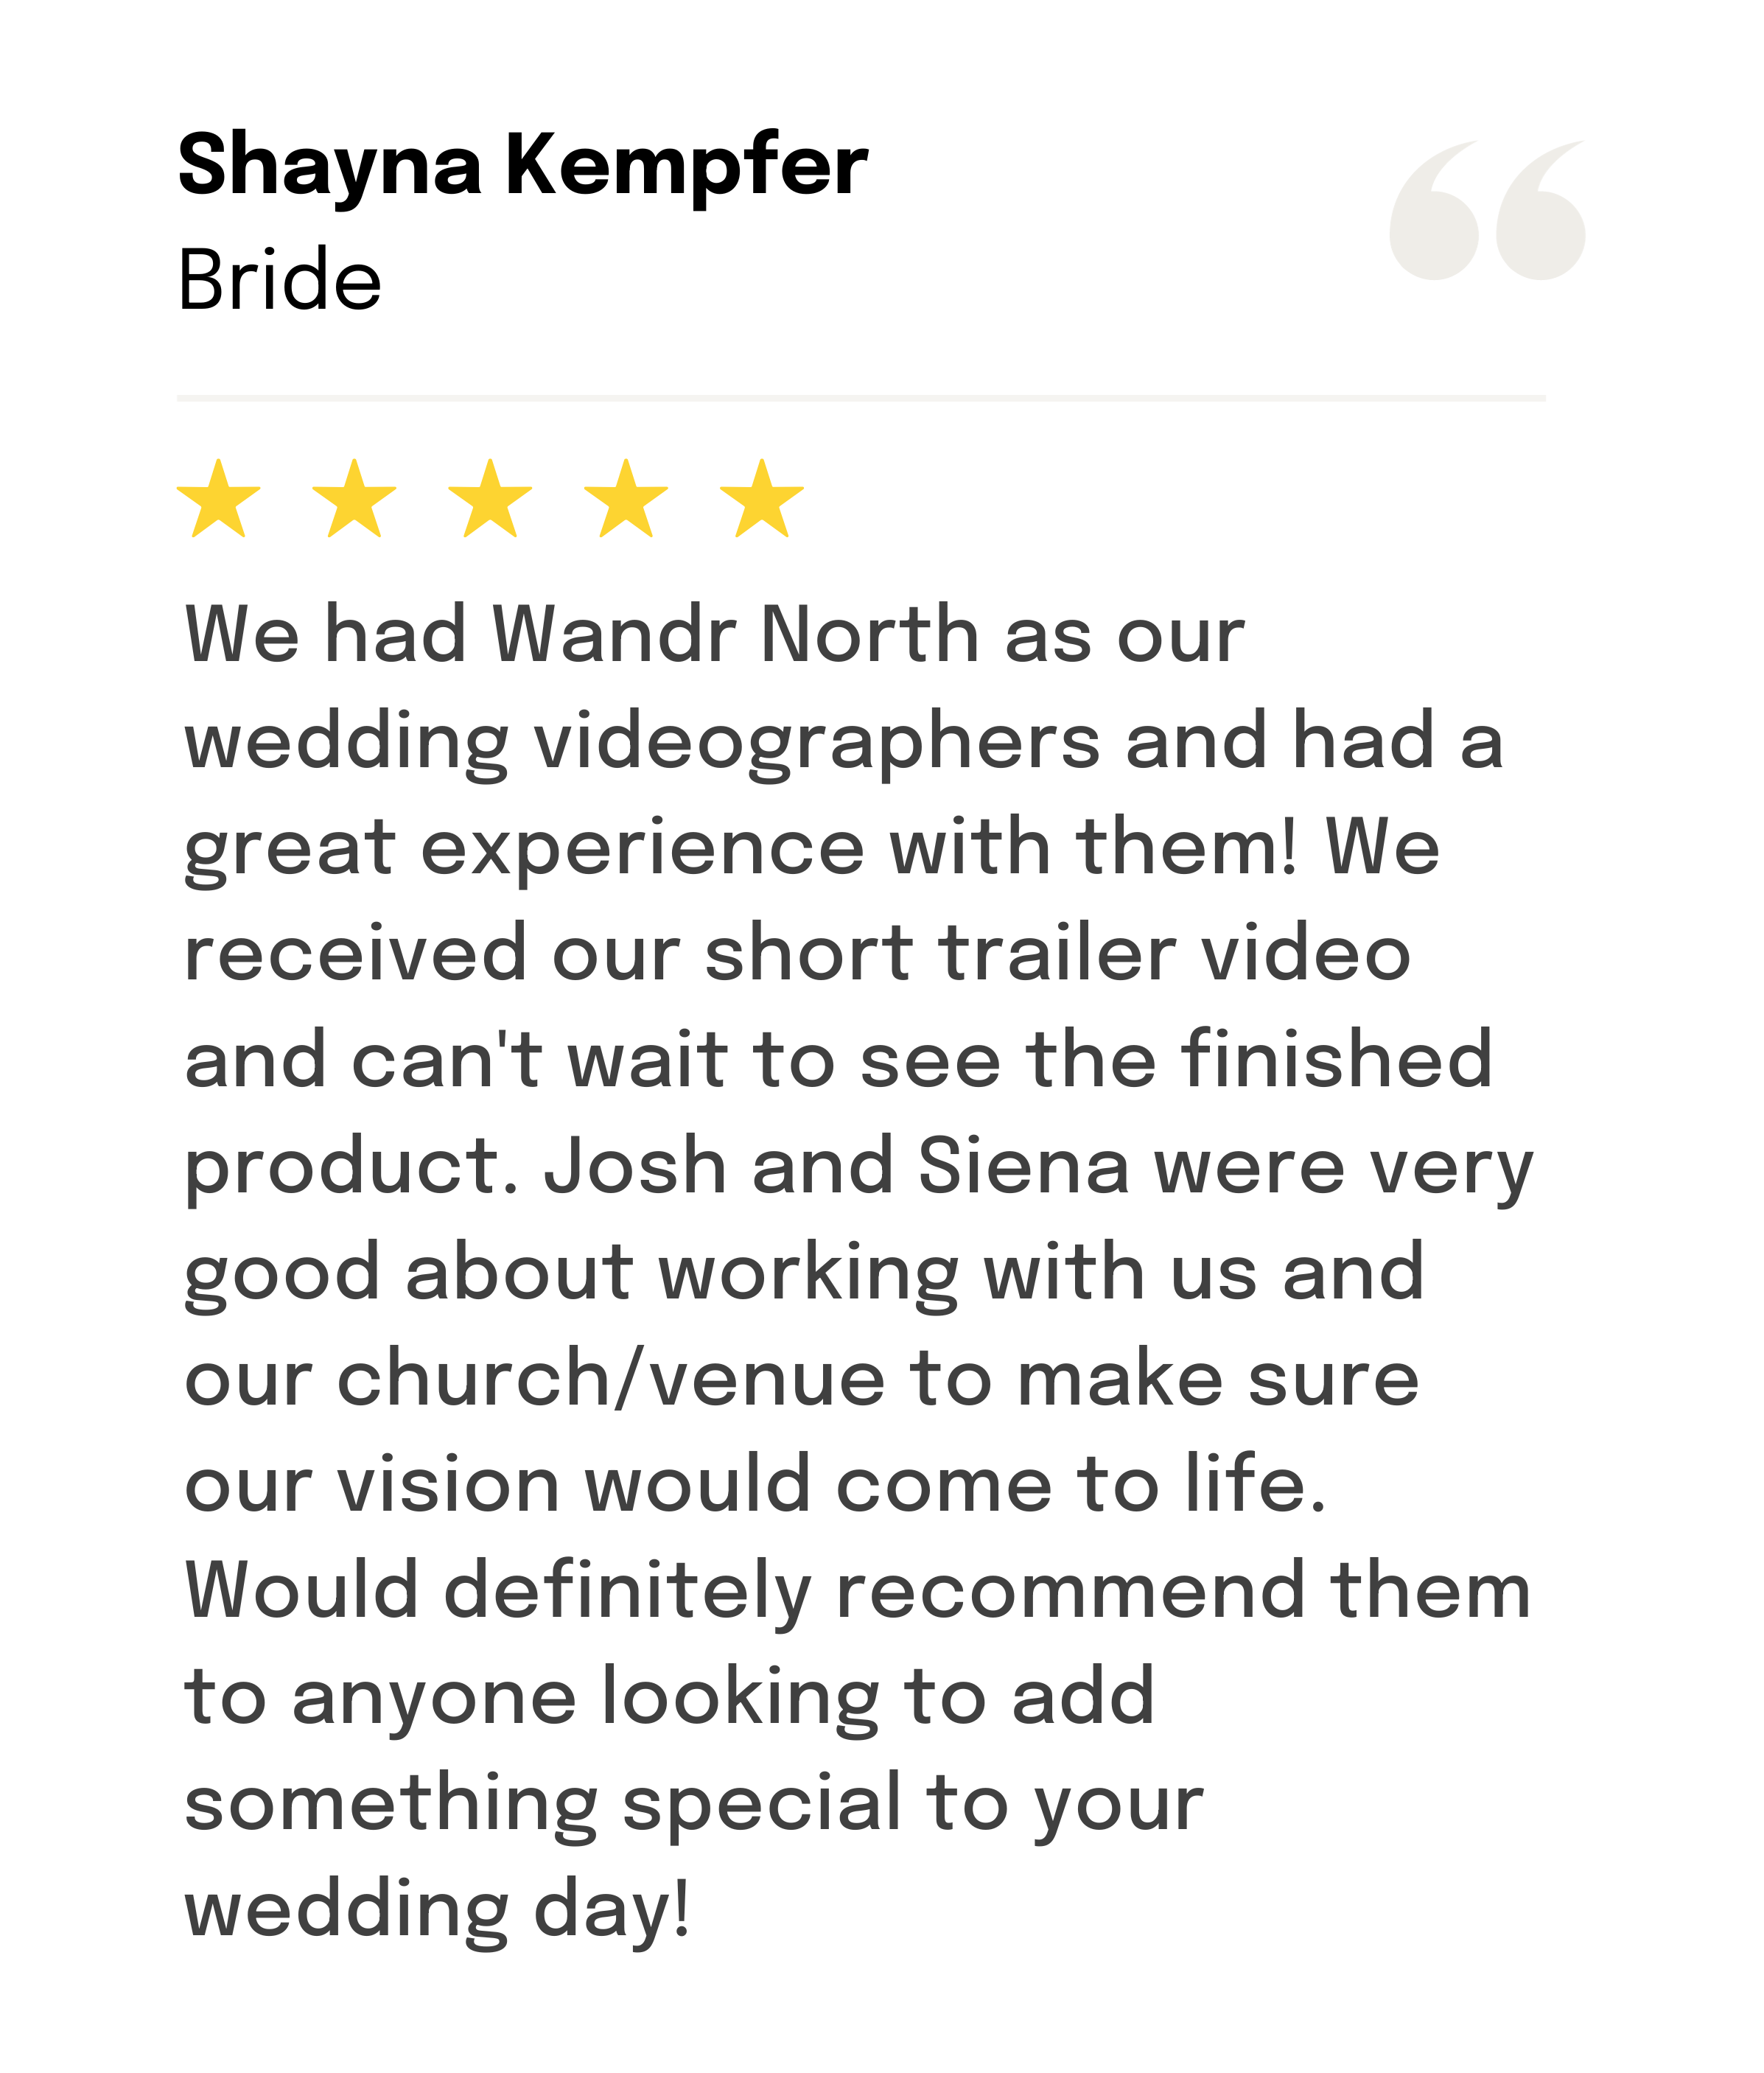 Shayna writes a 5-star review to Wandr North for their wedding videography services.